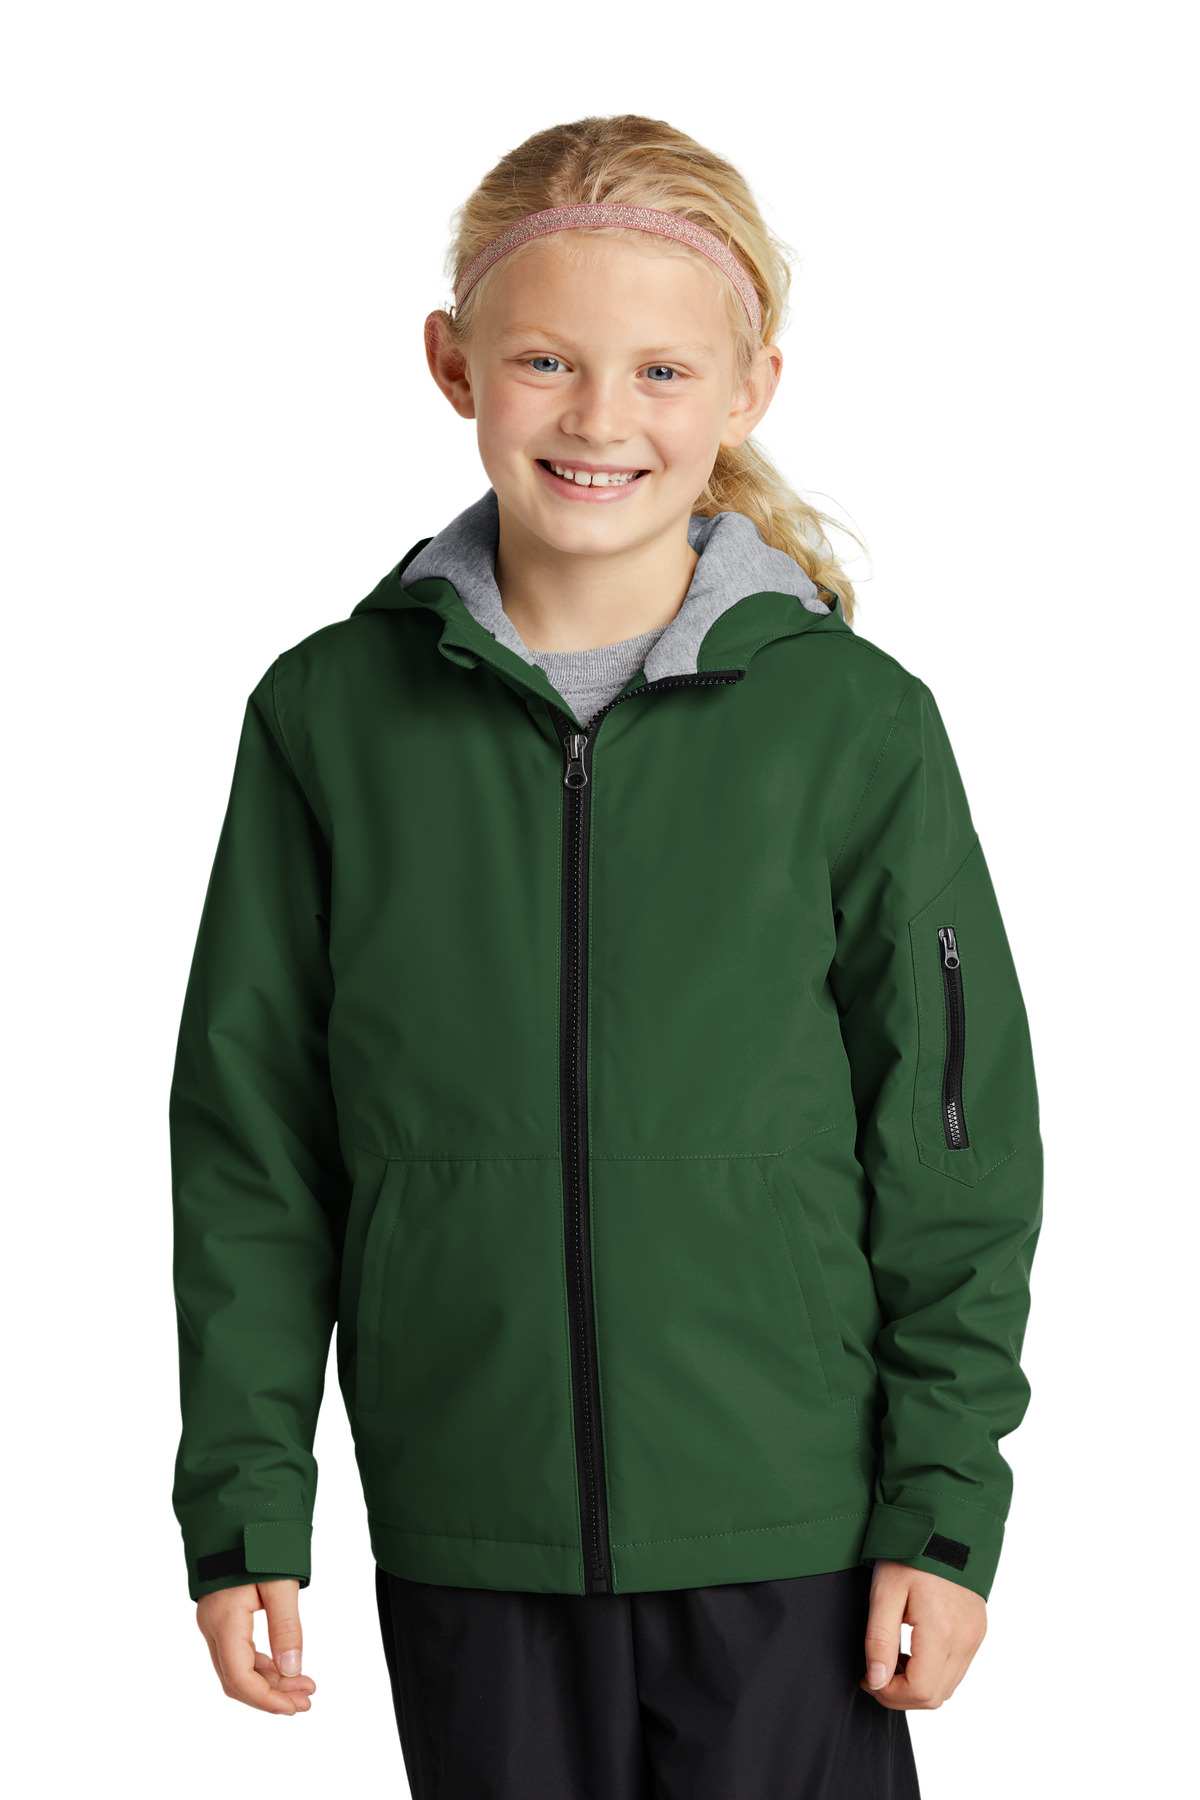 YST56 Embroidered Youth Waterproof Insulated Jacket